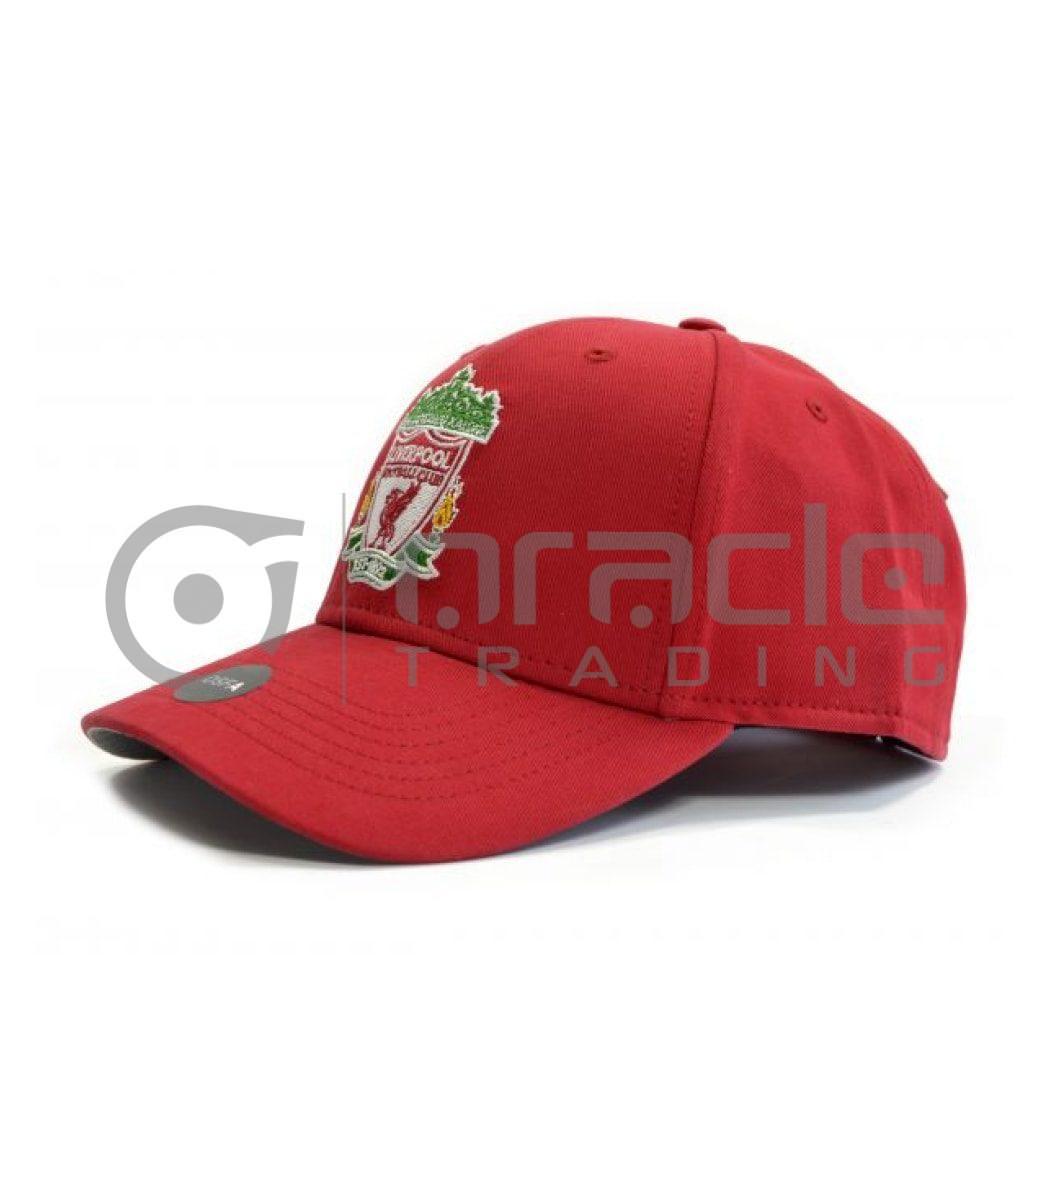 Liverpool Hat - Red - Classic